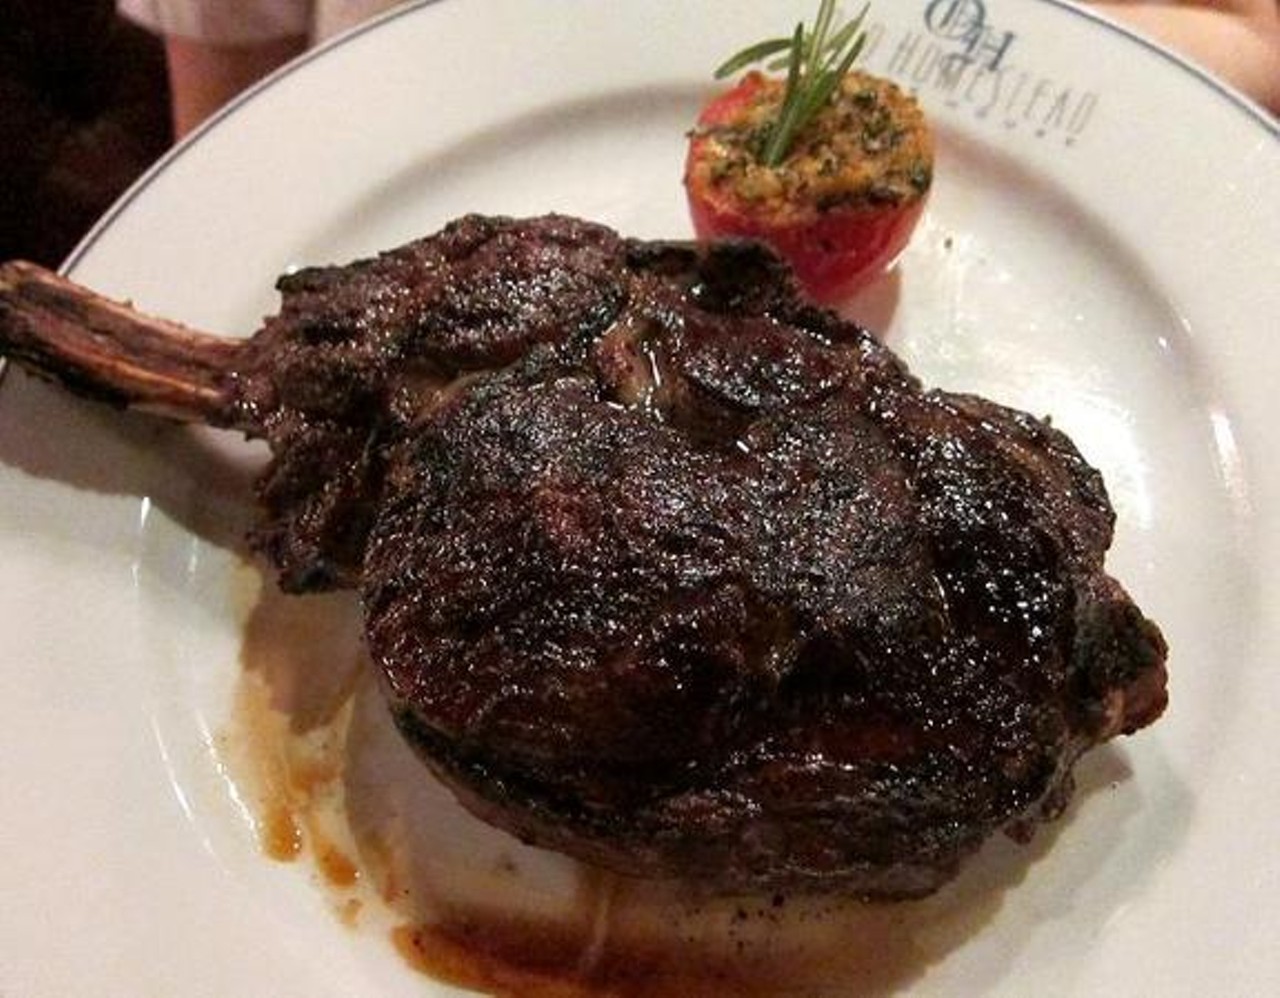 Steak can speak for itself.
The "Gotham Rib Steak on the Bone," photographed at the The Old Homestead in New York.